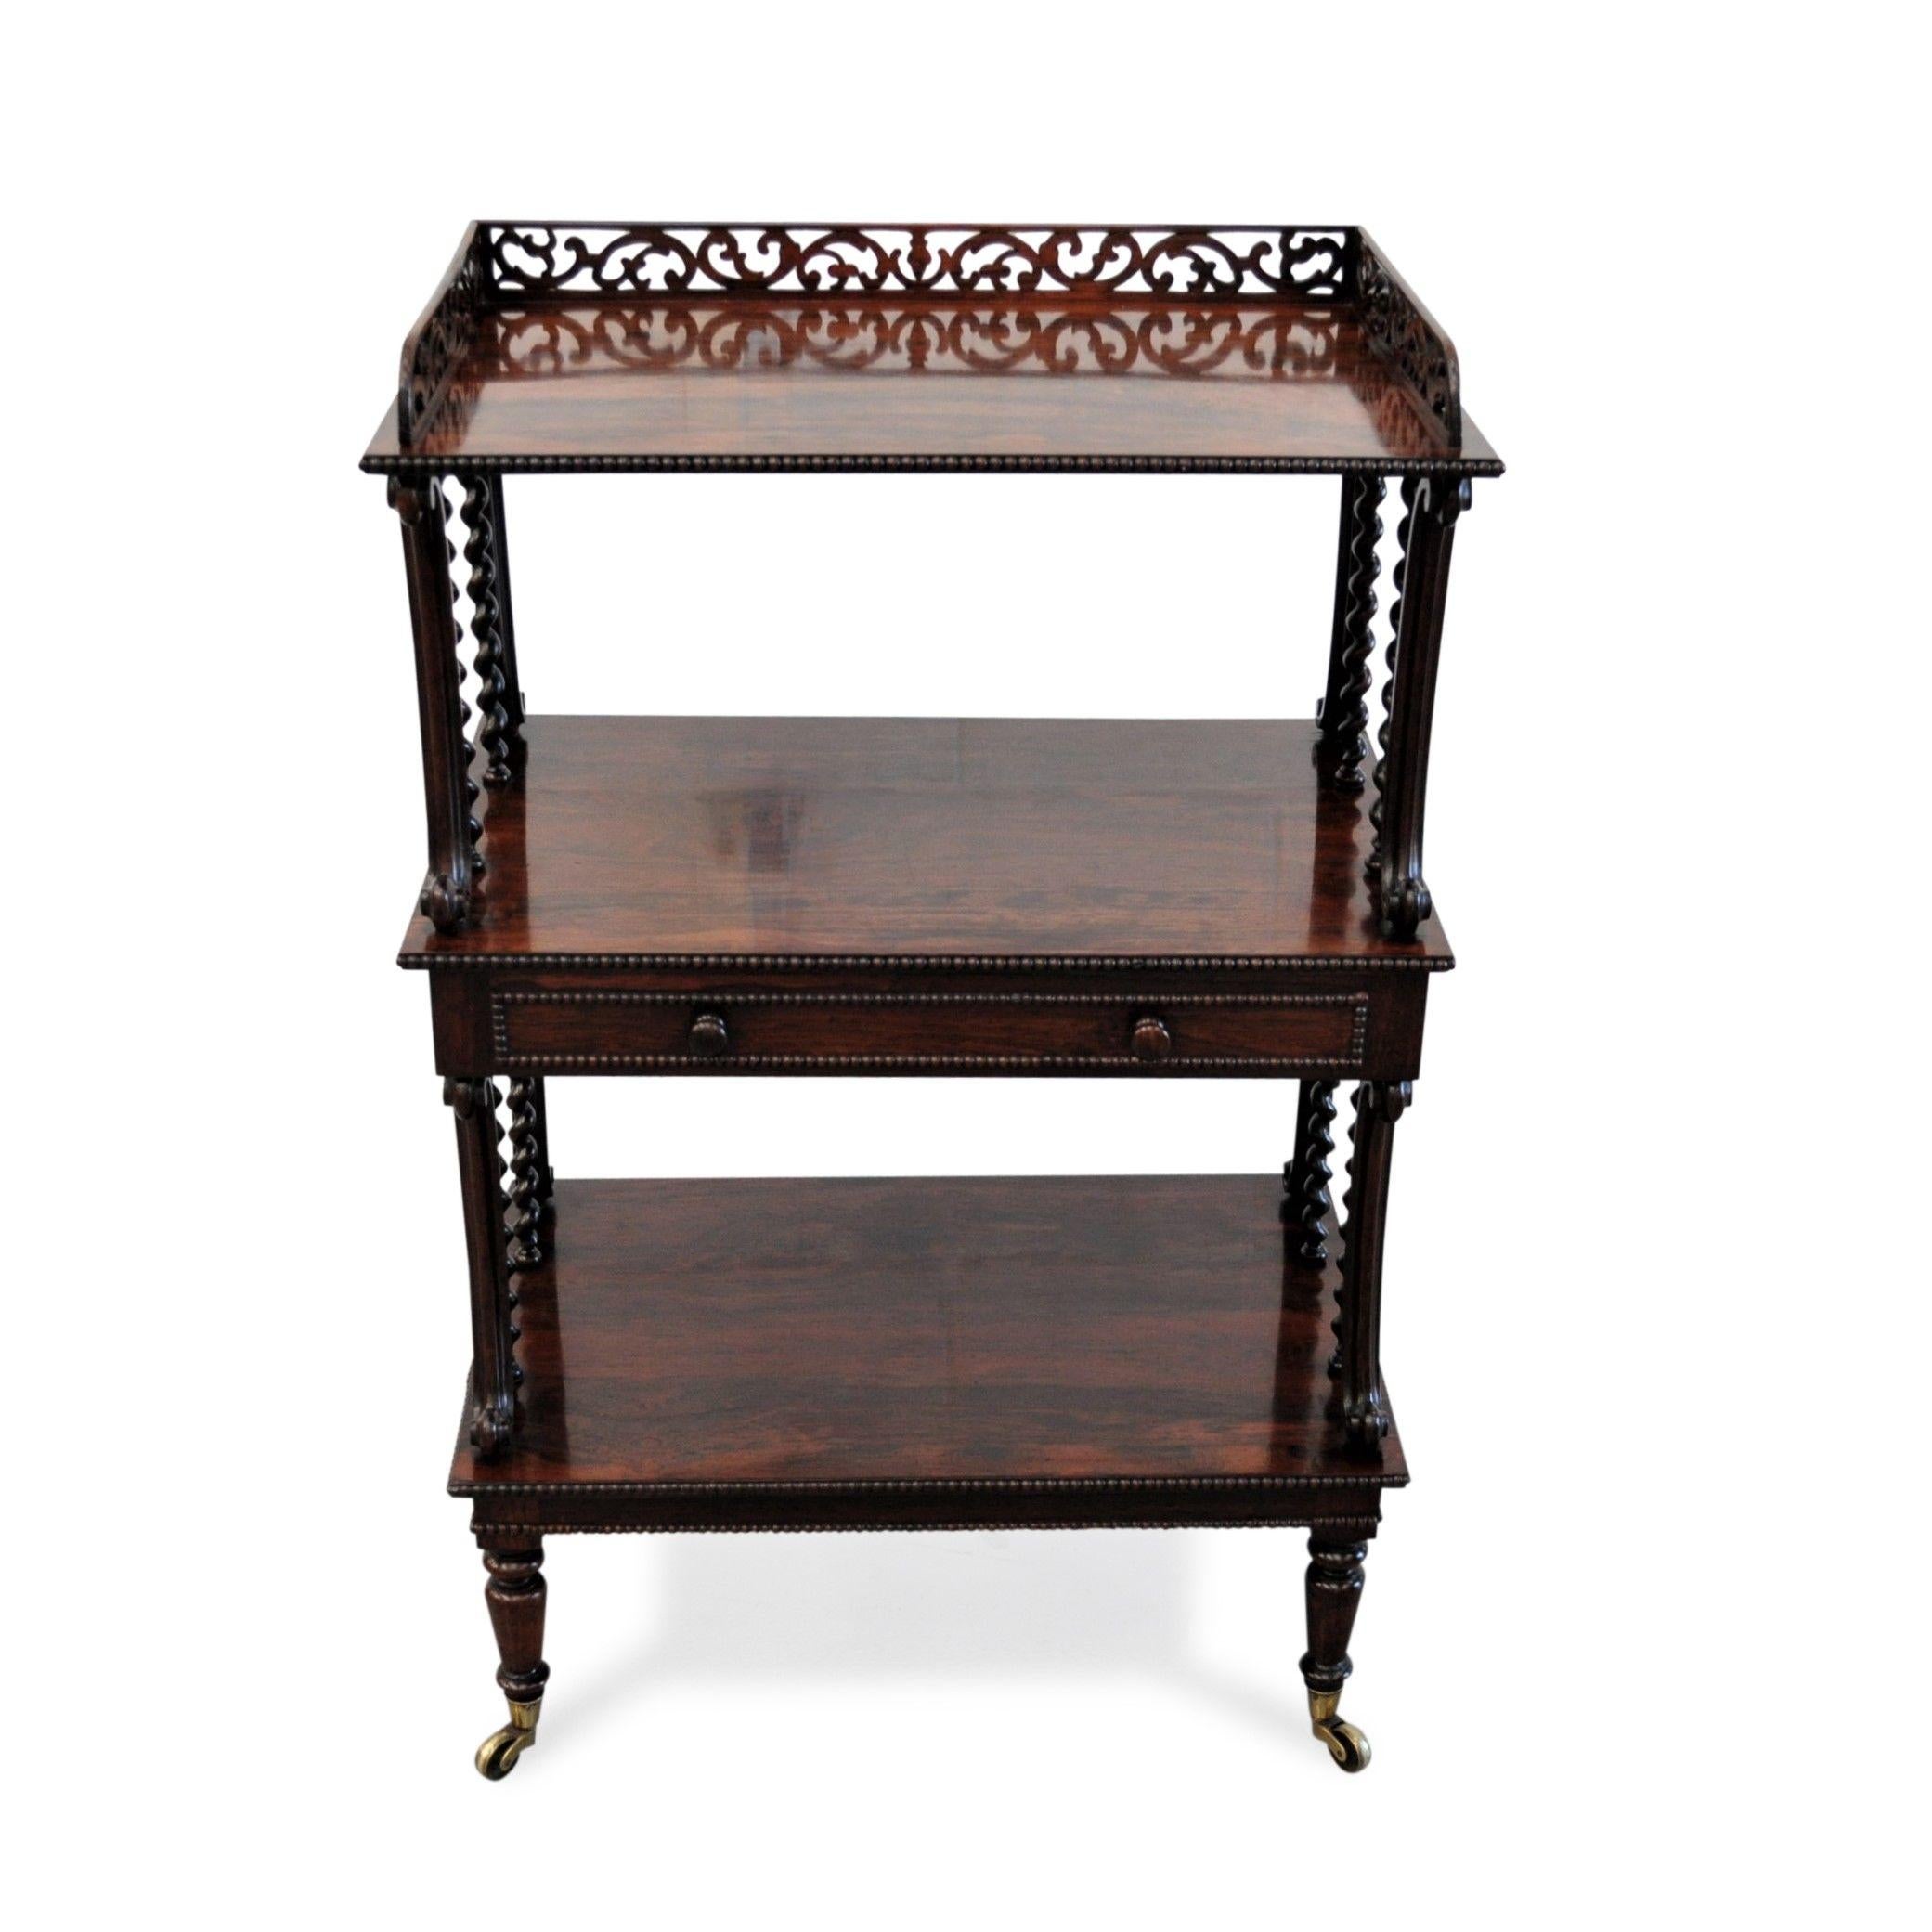 A fine and rare Regency three tier Etagere attributed to GILLOWS constructed in Gonçalo Alves (Tigerwood), with each shelf edged in close bead-work. The top tier with three-quarter fret-work gallery and the middle tier fitted with a drawer below and